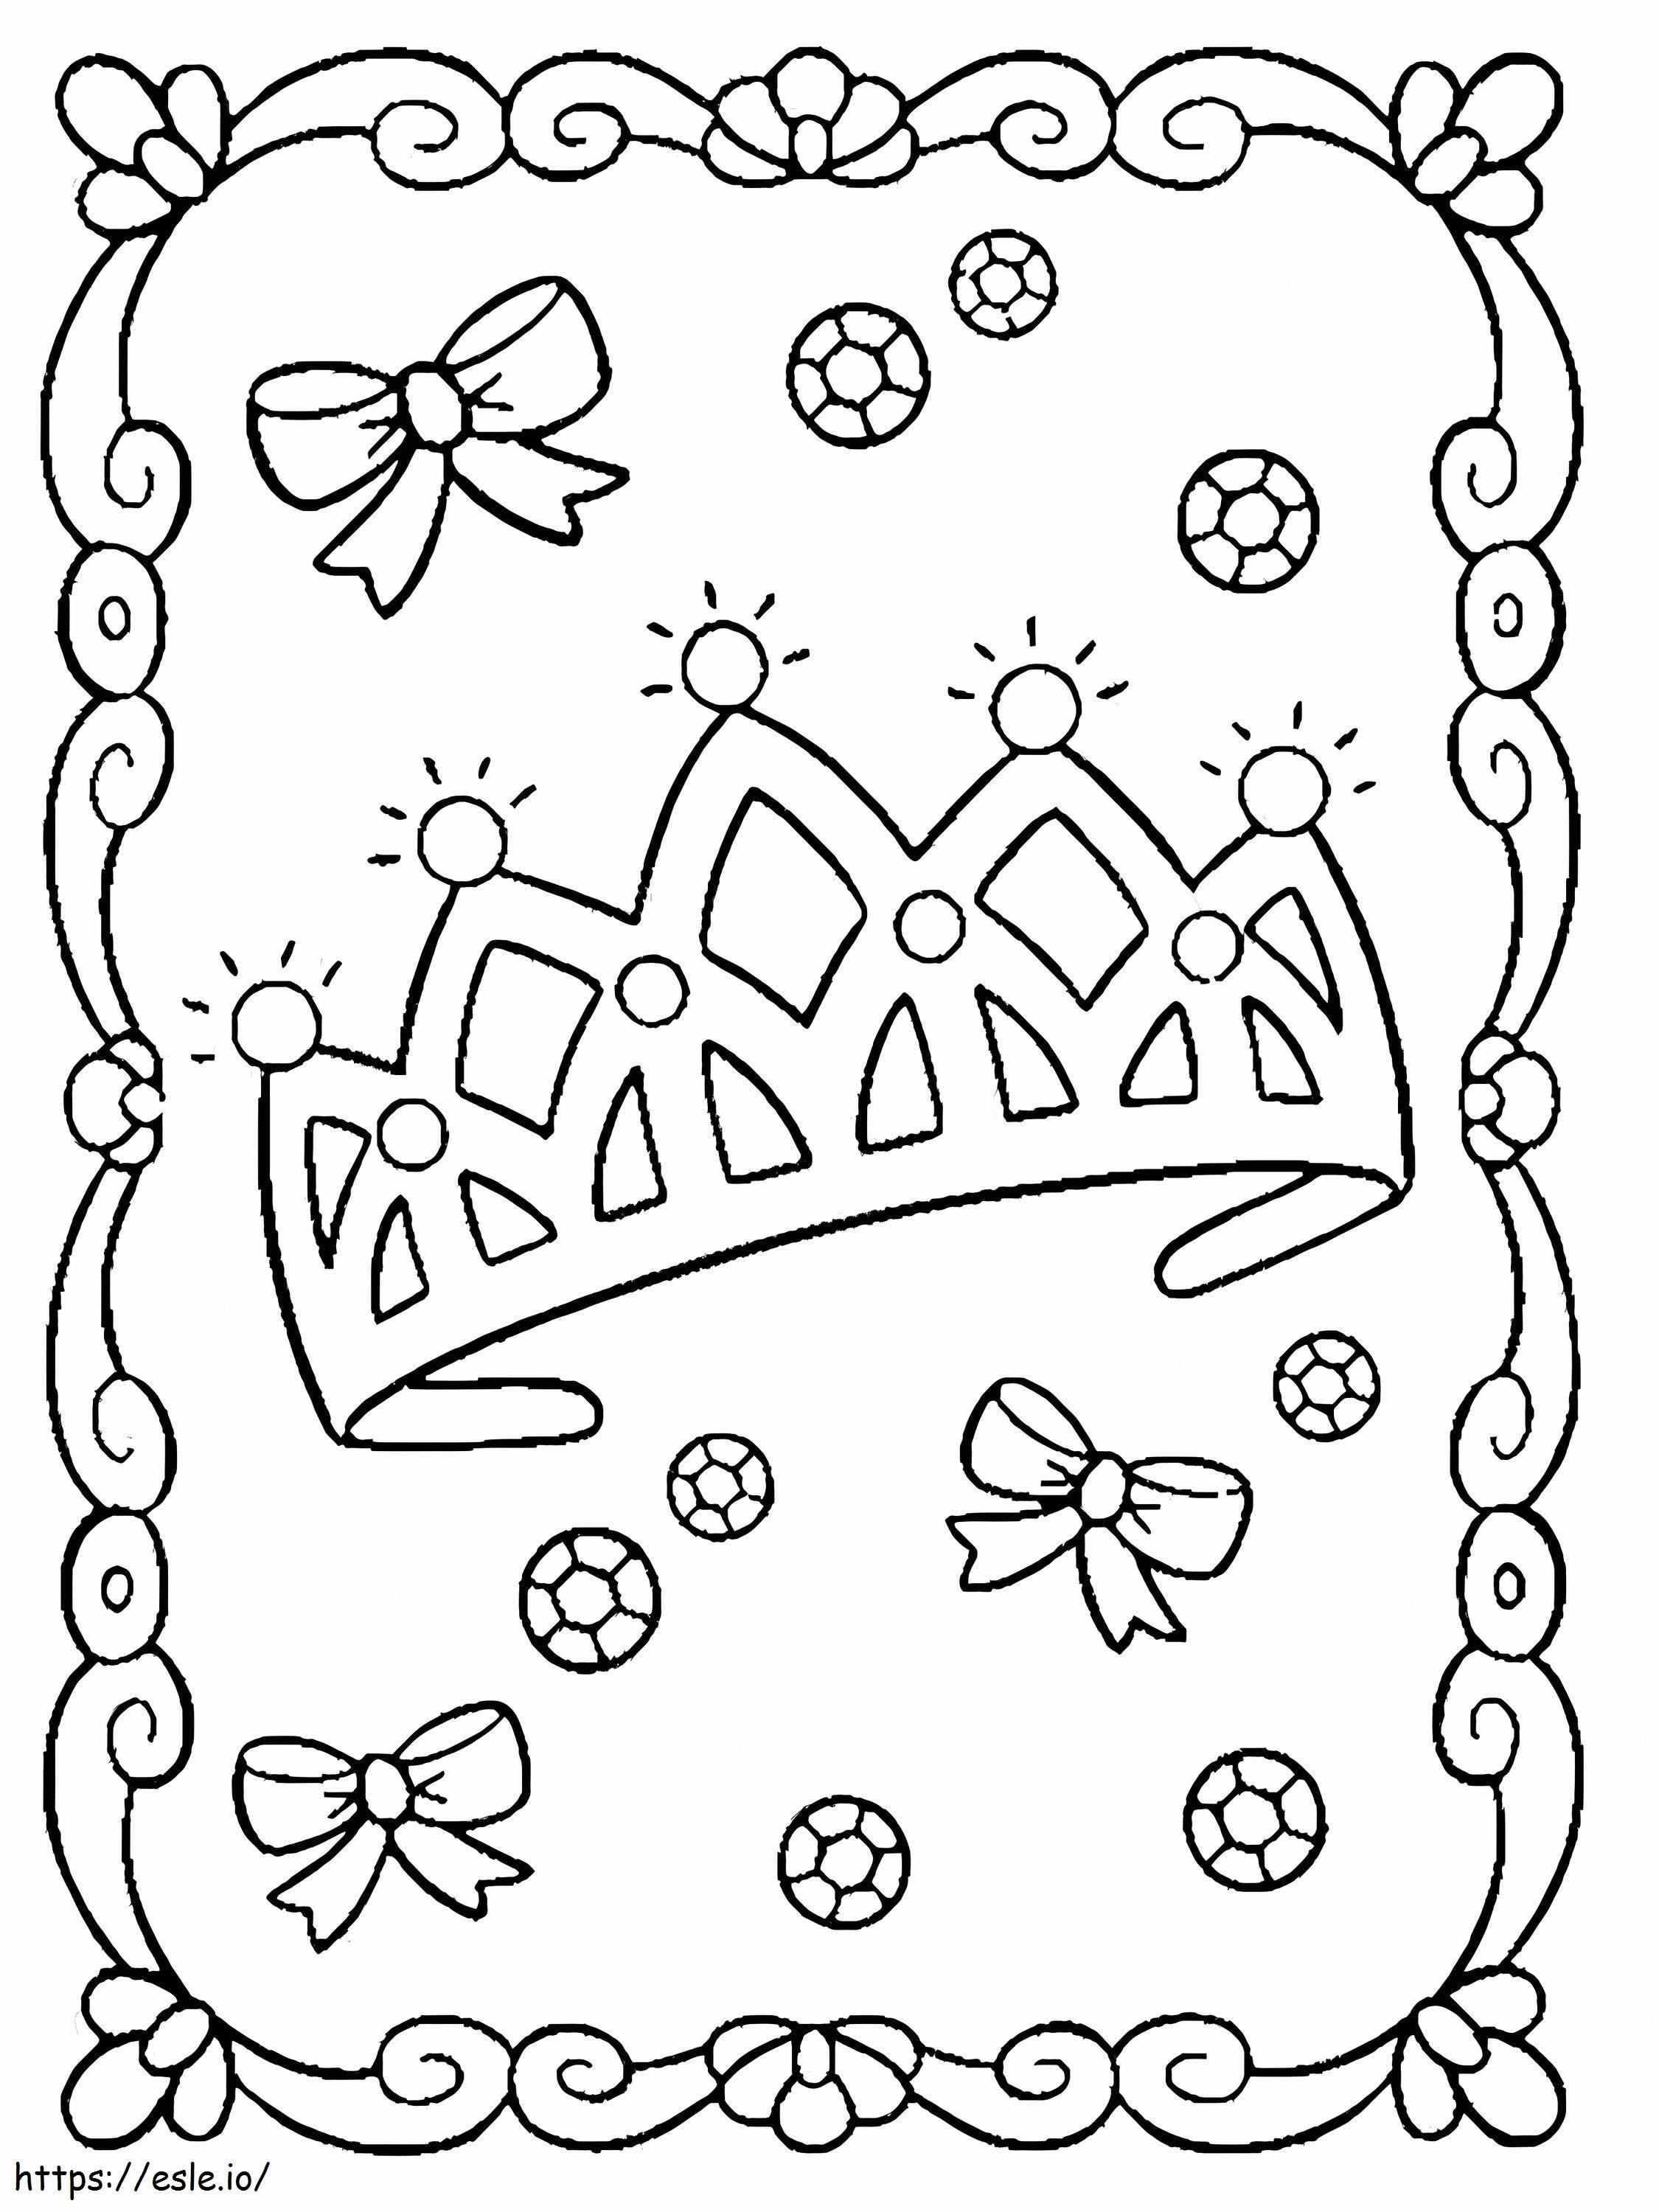 Shining crown coloring page